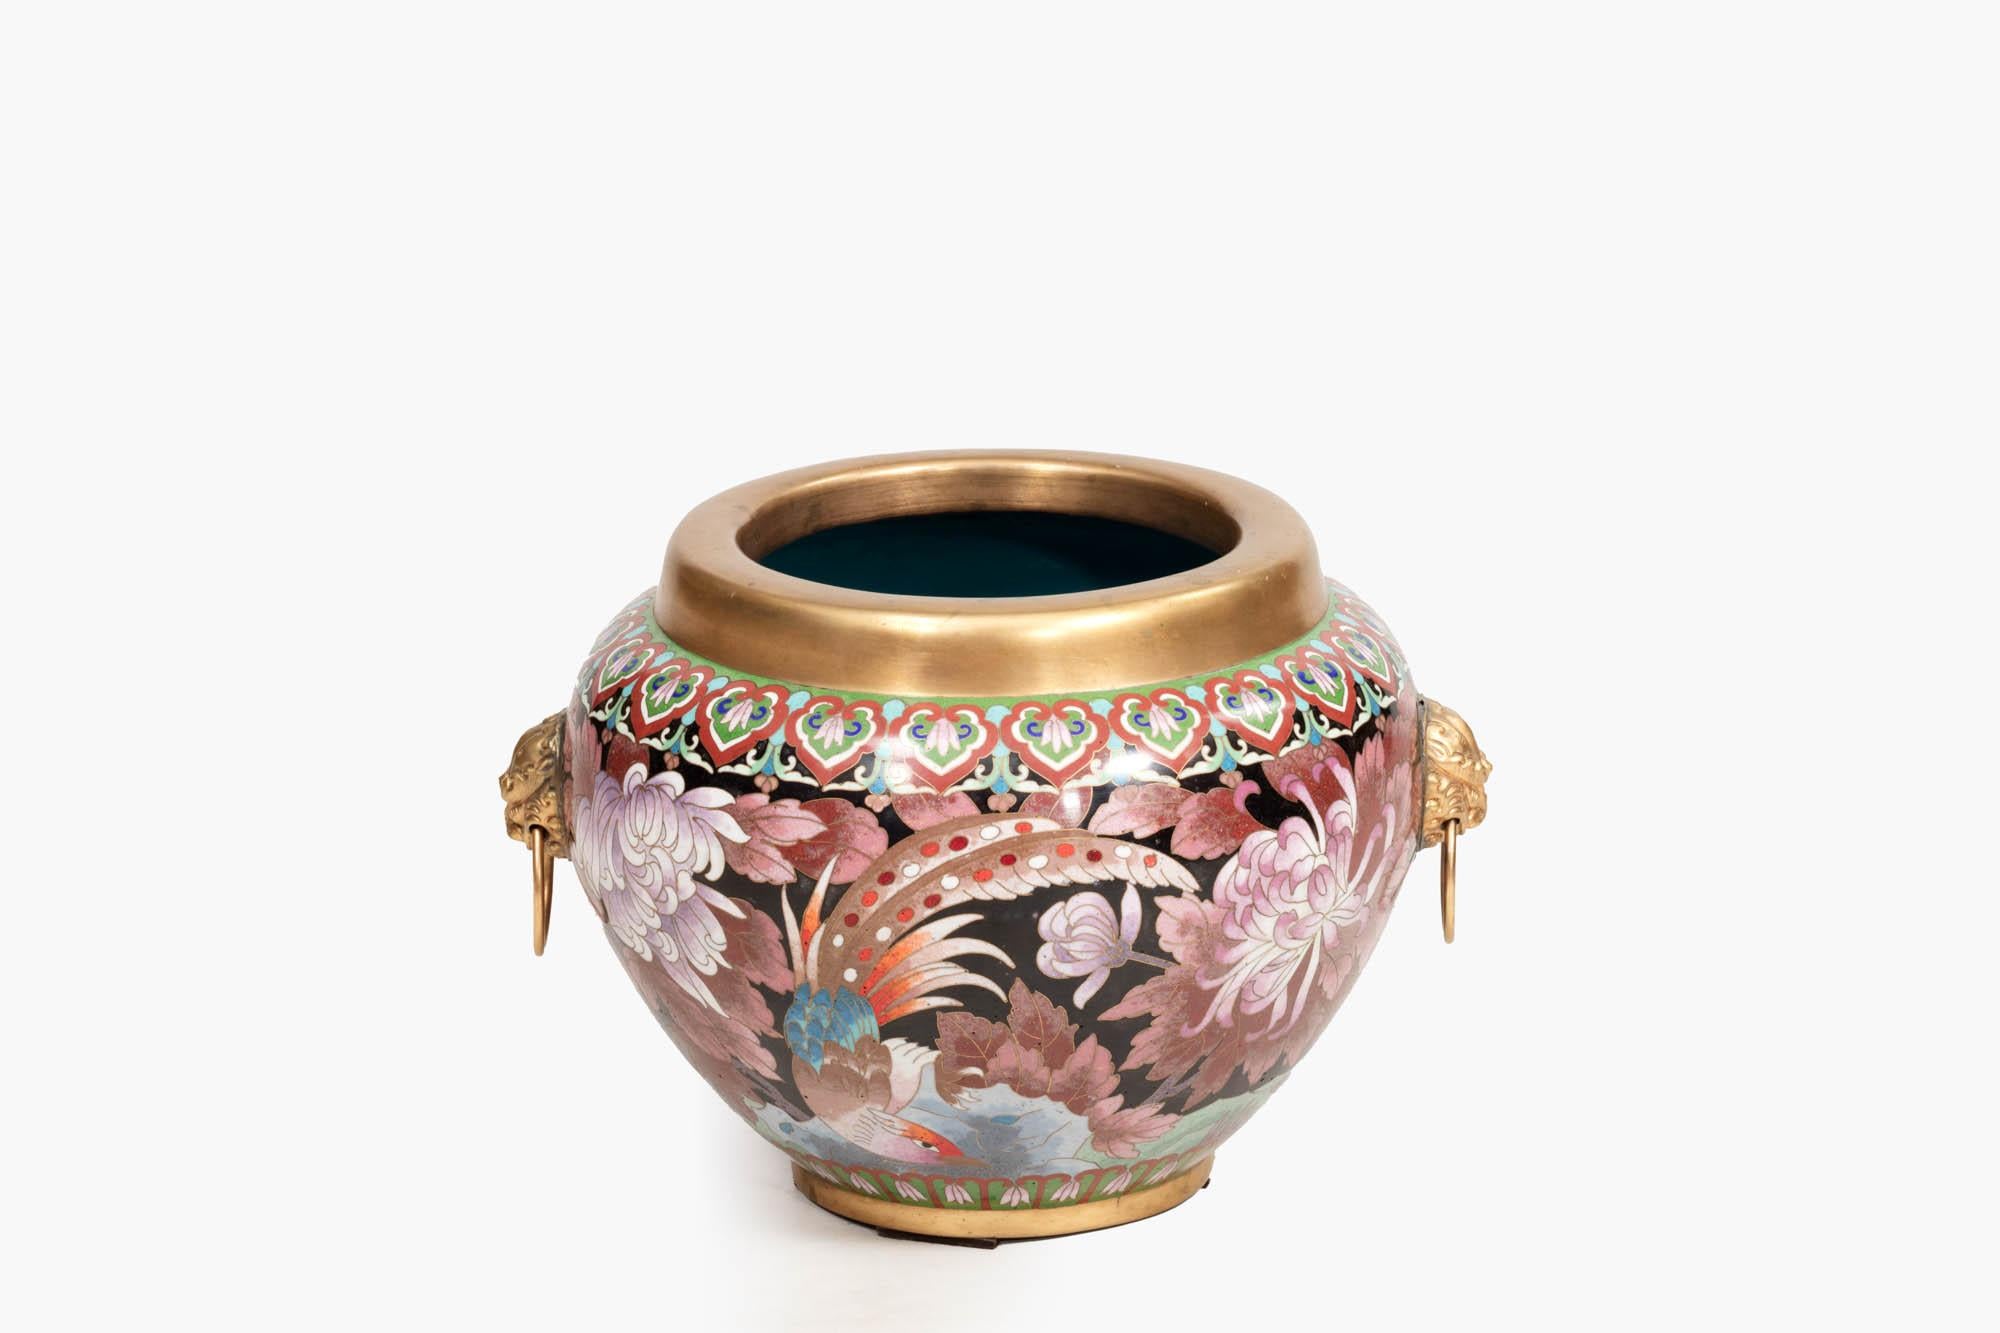 19th century Cloisonné vase richly decorated with bright Oriental patterning, chrysanthemum flowers, and birds. Topped with a gold rim, and featuring a bright blue interior, two sides are flanked with golden lion mask handles.

Cloisonné is a way